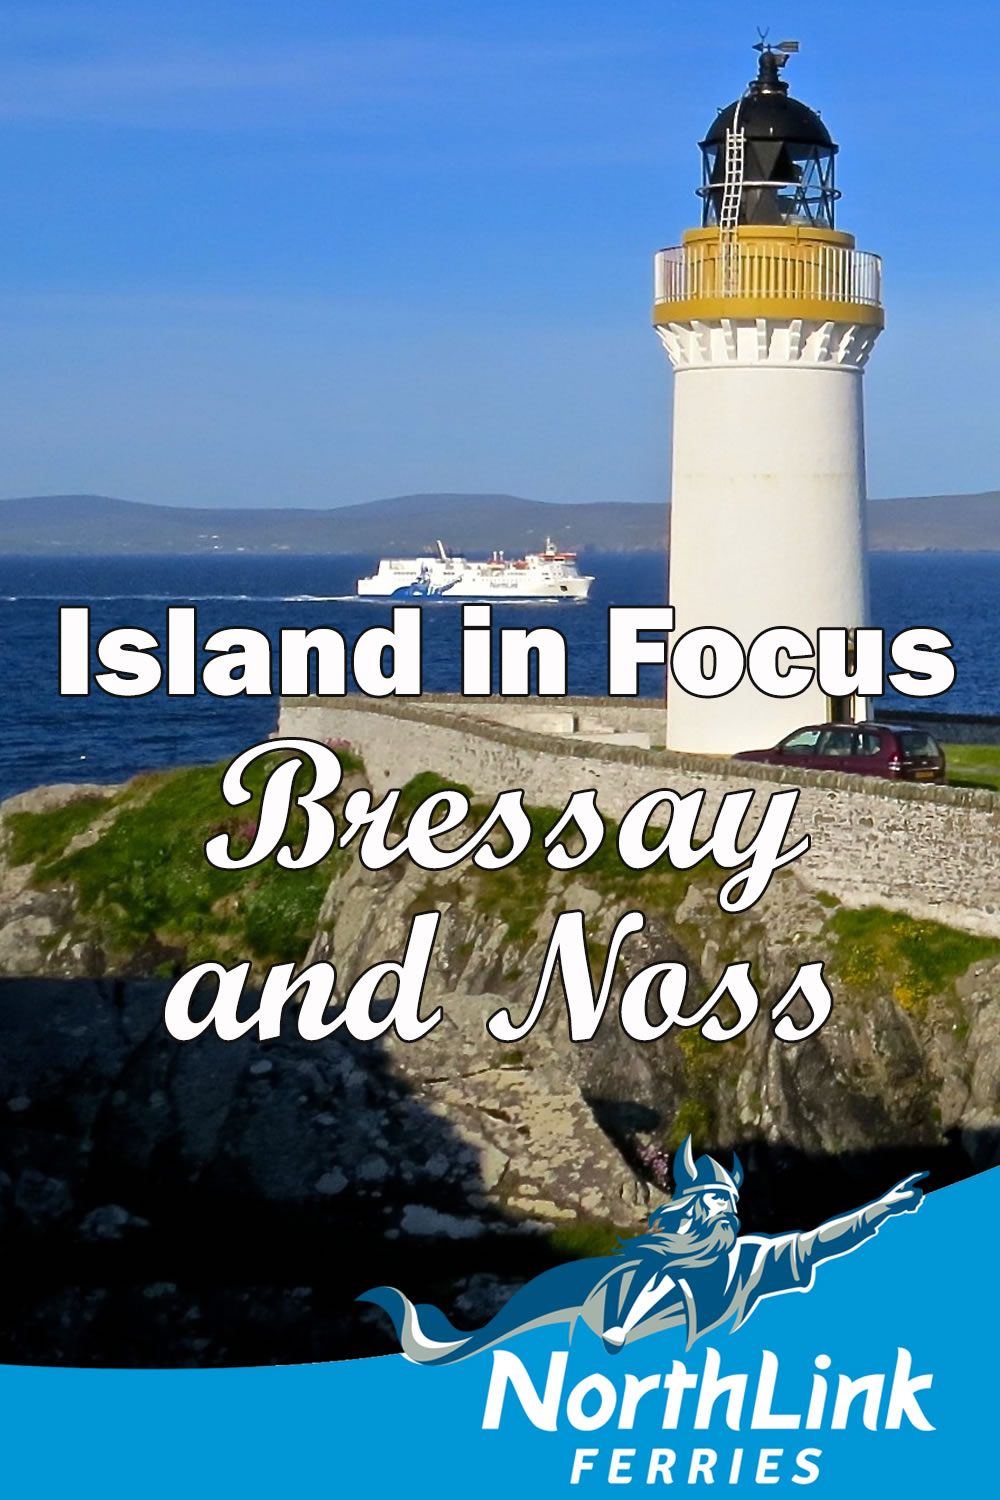 Island in Focus - Bressay and Noss